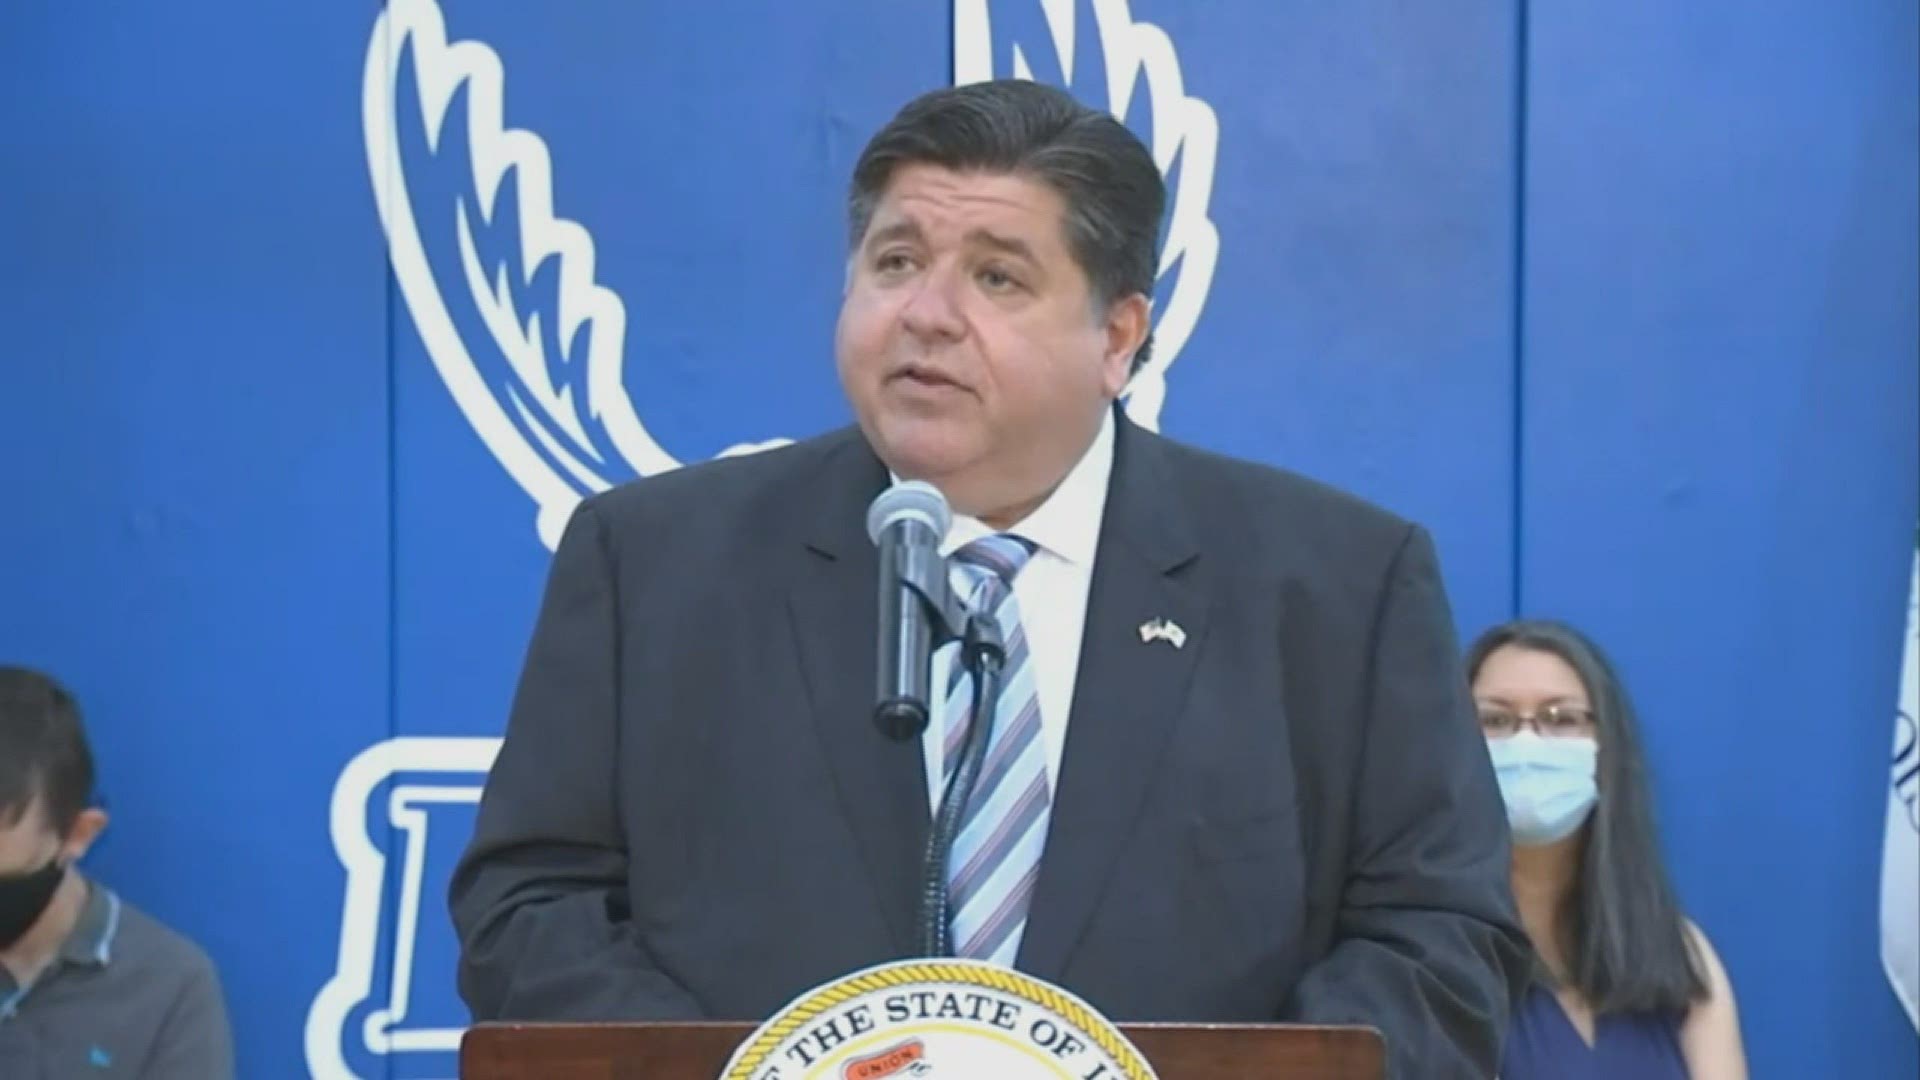 Gov. J.B. Pritzker signed legislation on Wednesday, July 28 that allows students who turn 22 to continue learning through the end of that school year.